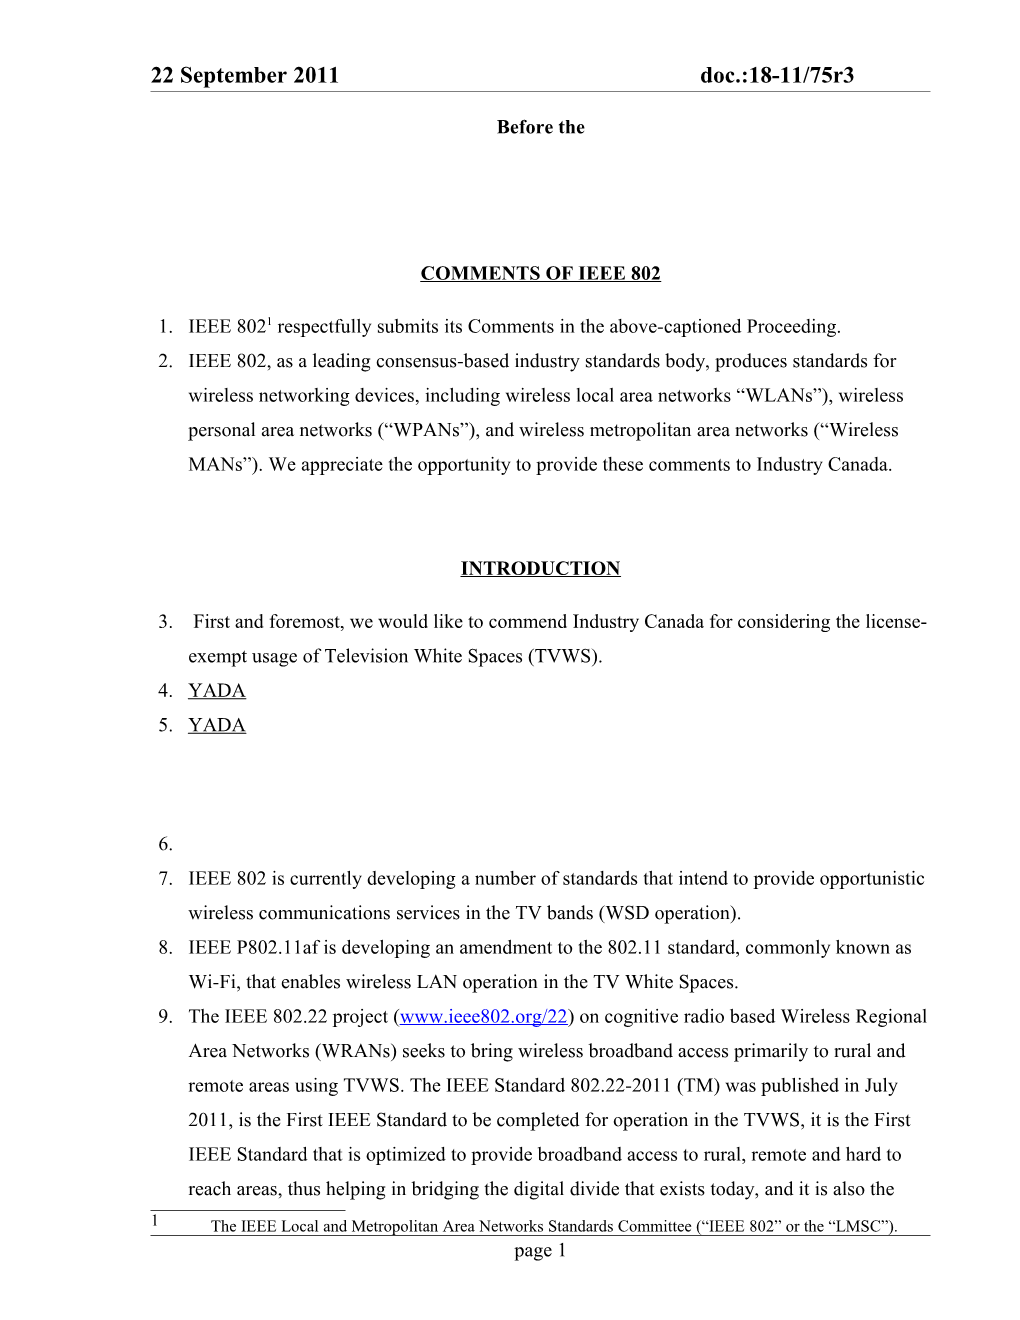 IEEE 802 Response to Canadian Consultation on TVWS